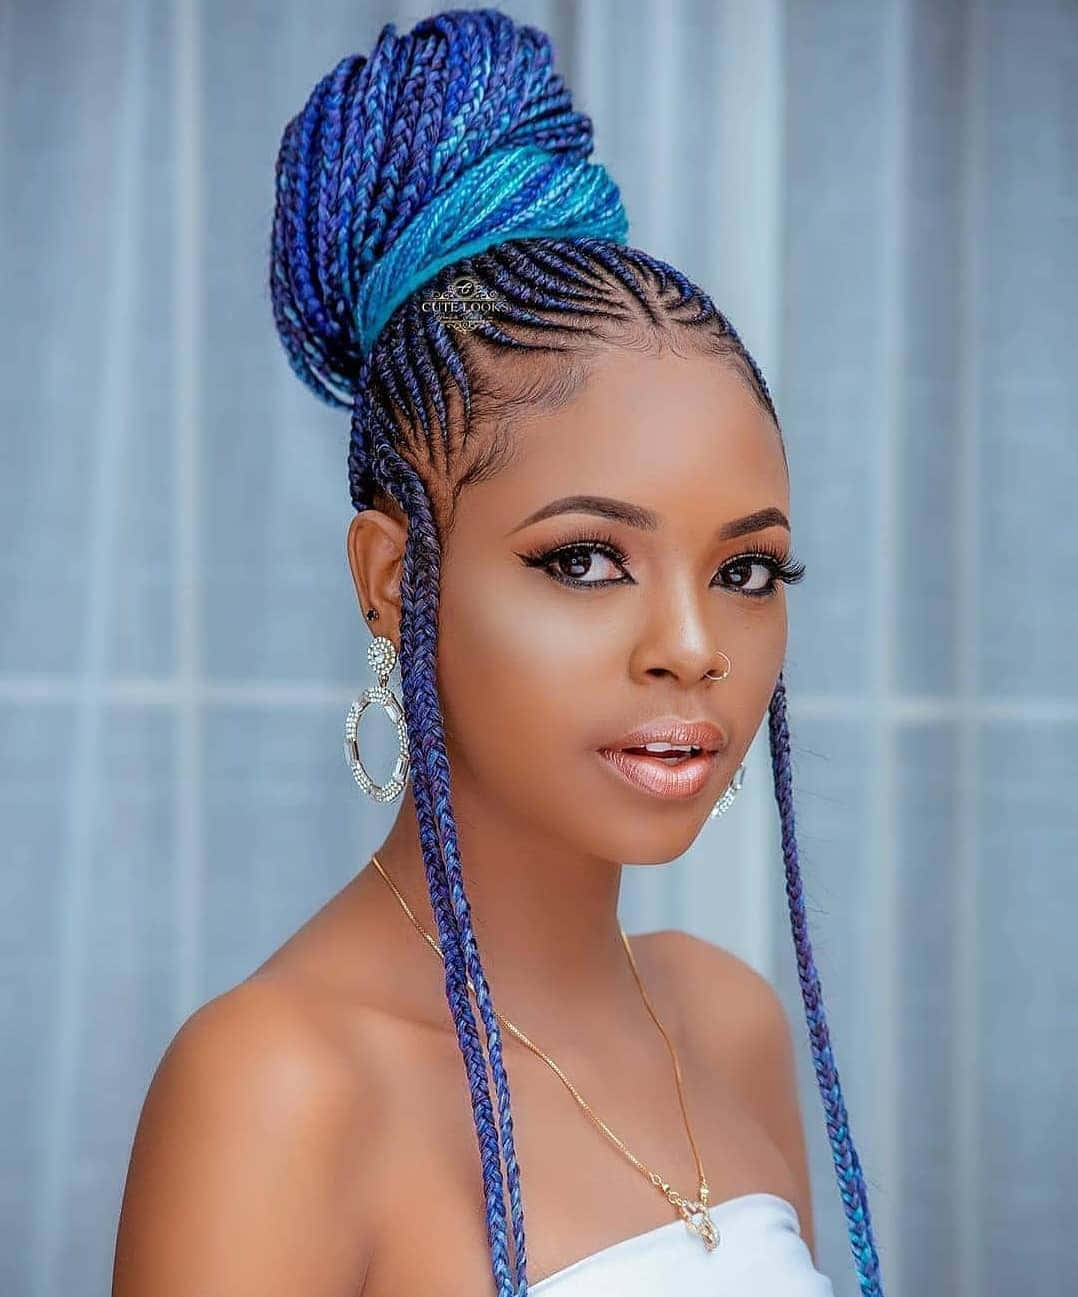 A Beautiful Woman With Braids In Blue And White